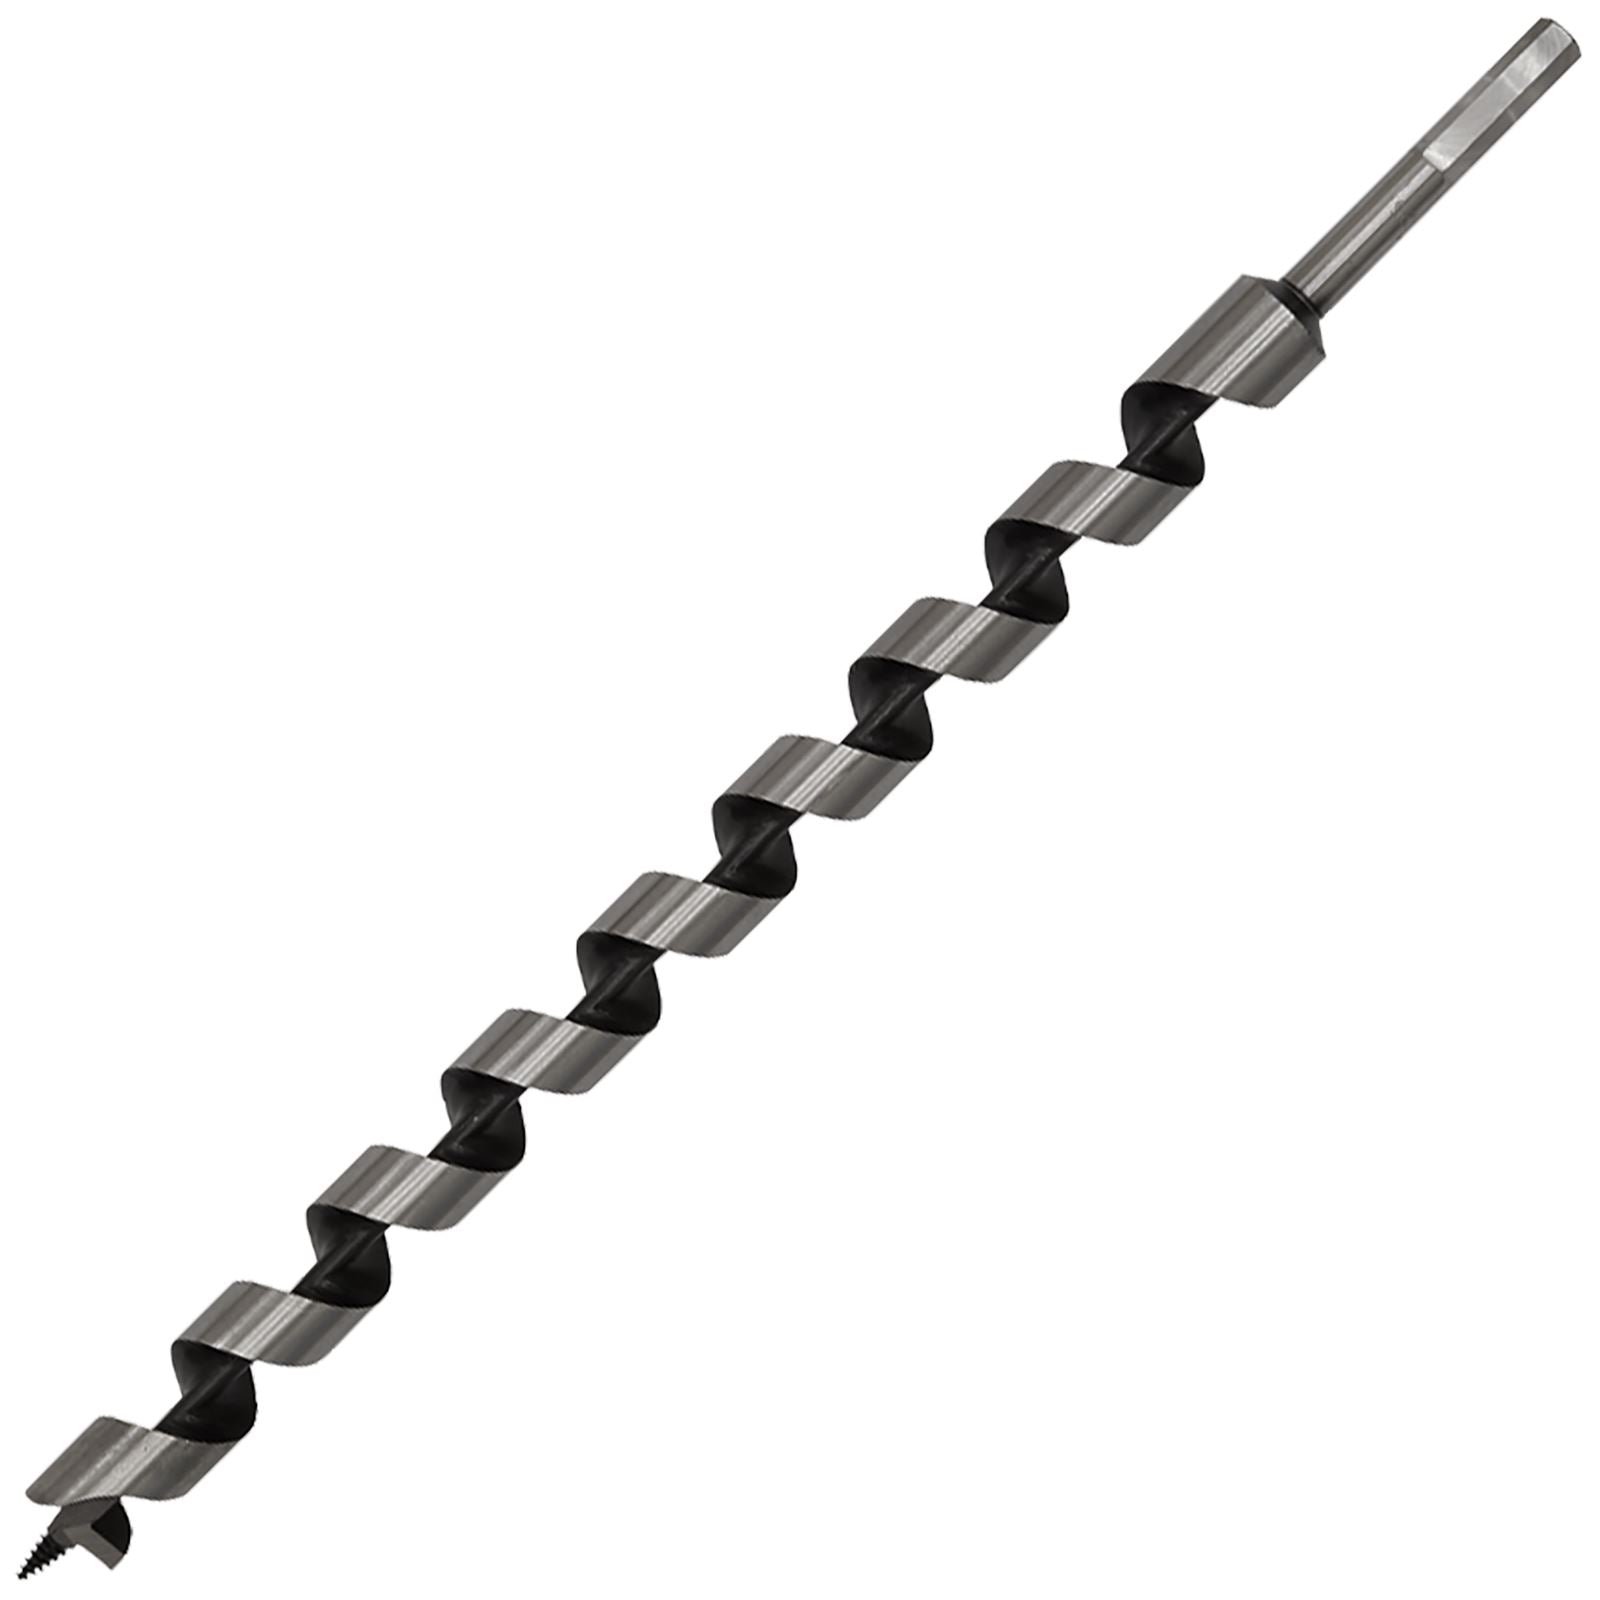 Worksafe by Sealey Auger Wood Drill Bit 25mm x 460mm